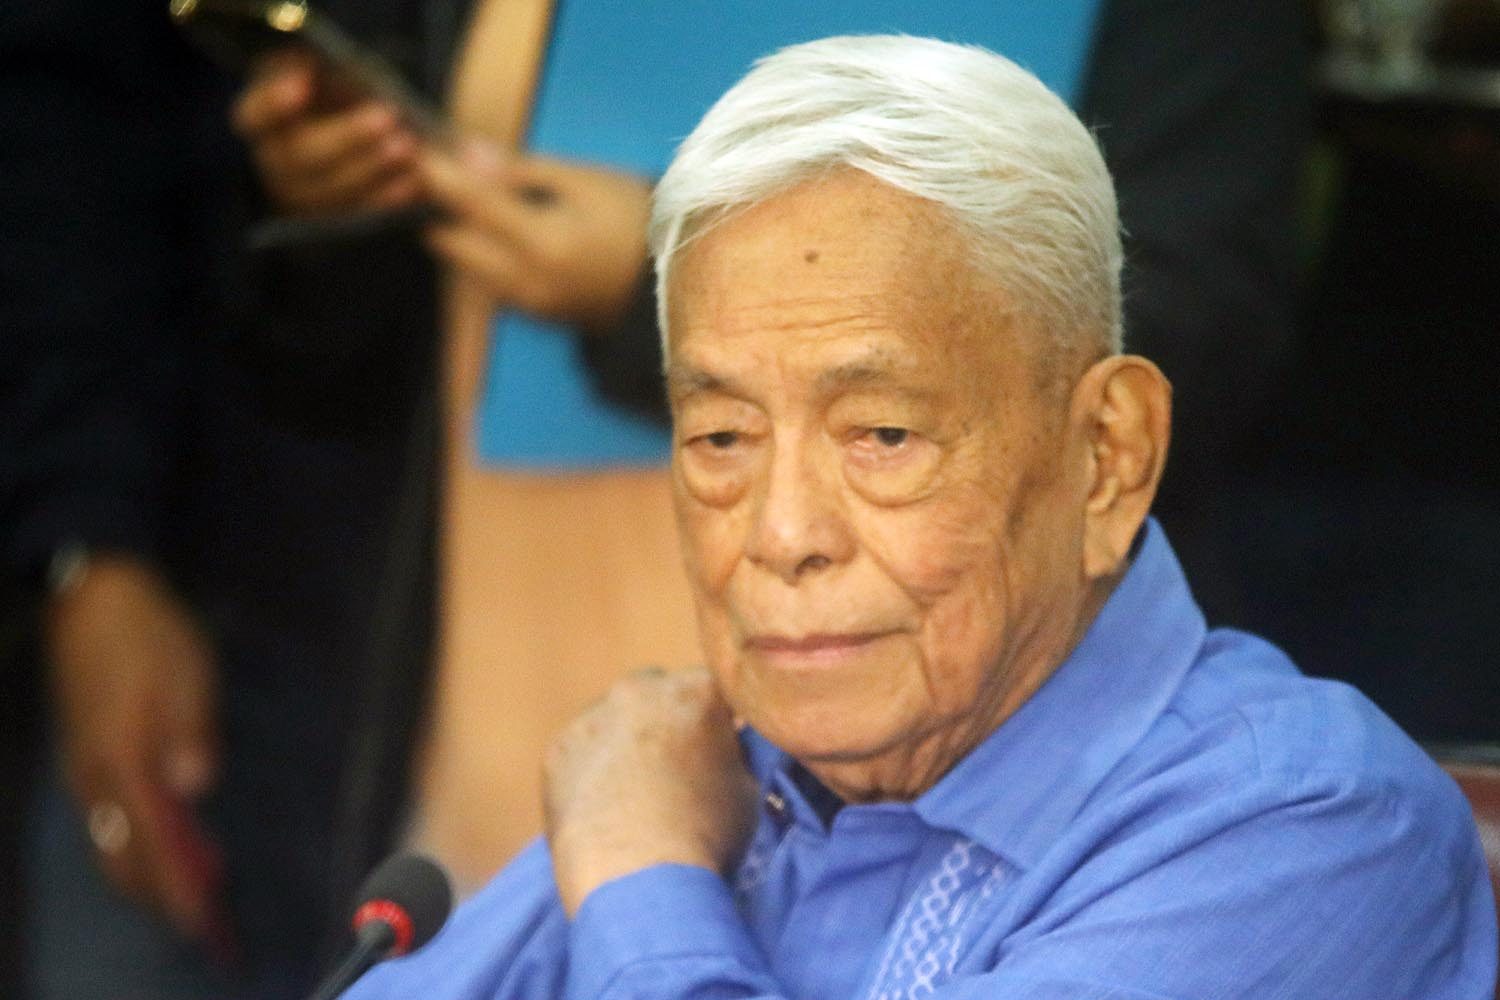 ‘Repudiate’ Enrile, Marcos attempt to revise history, says Nene Pimentel